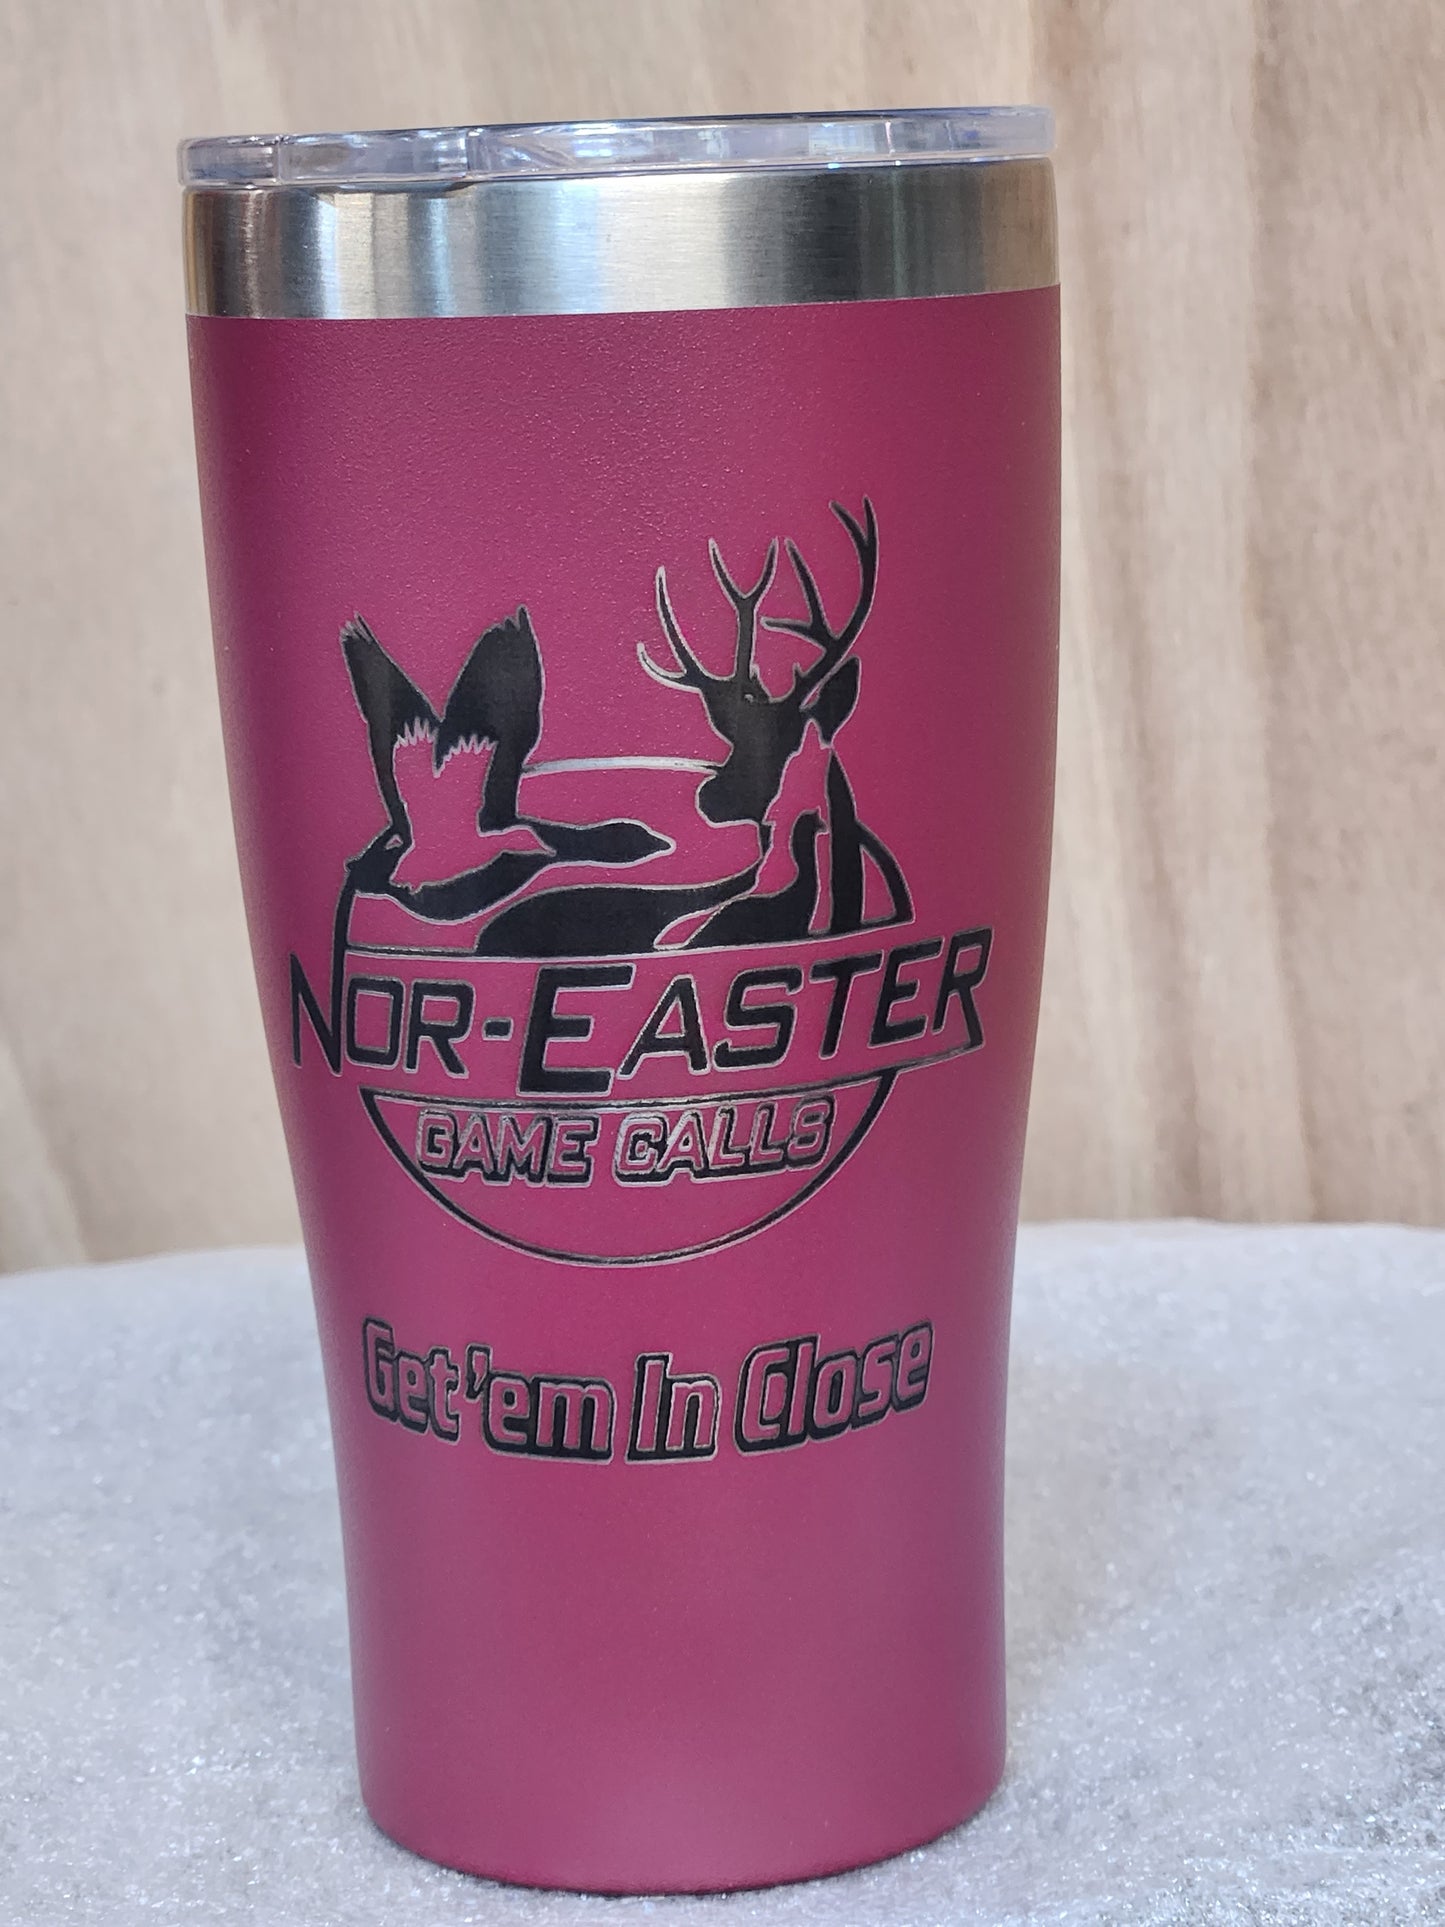 Duck hunting with lab 20 ounce tumbler